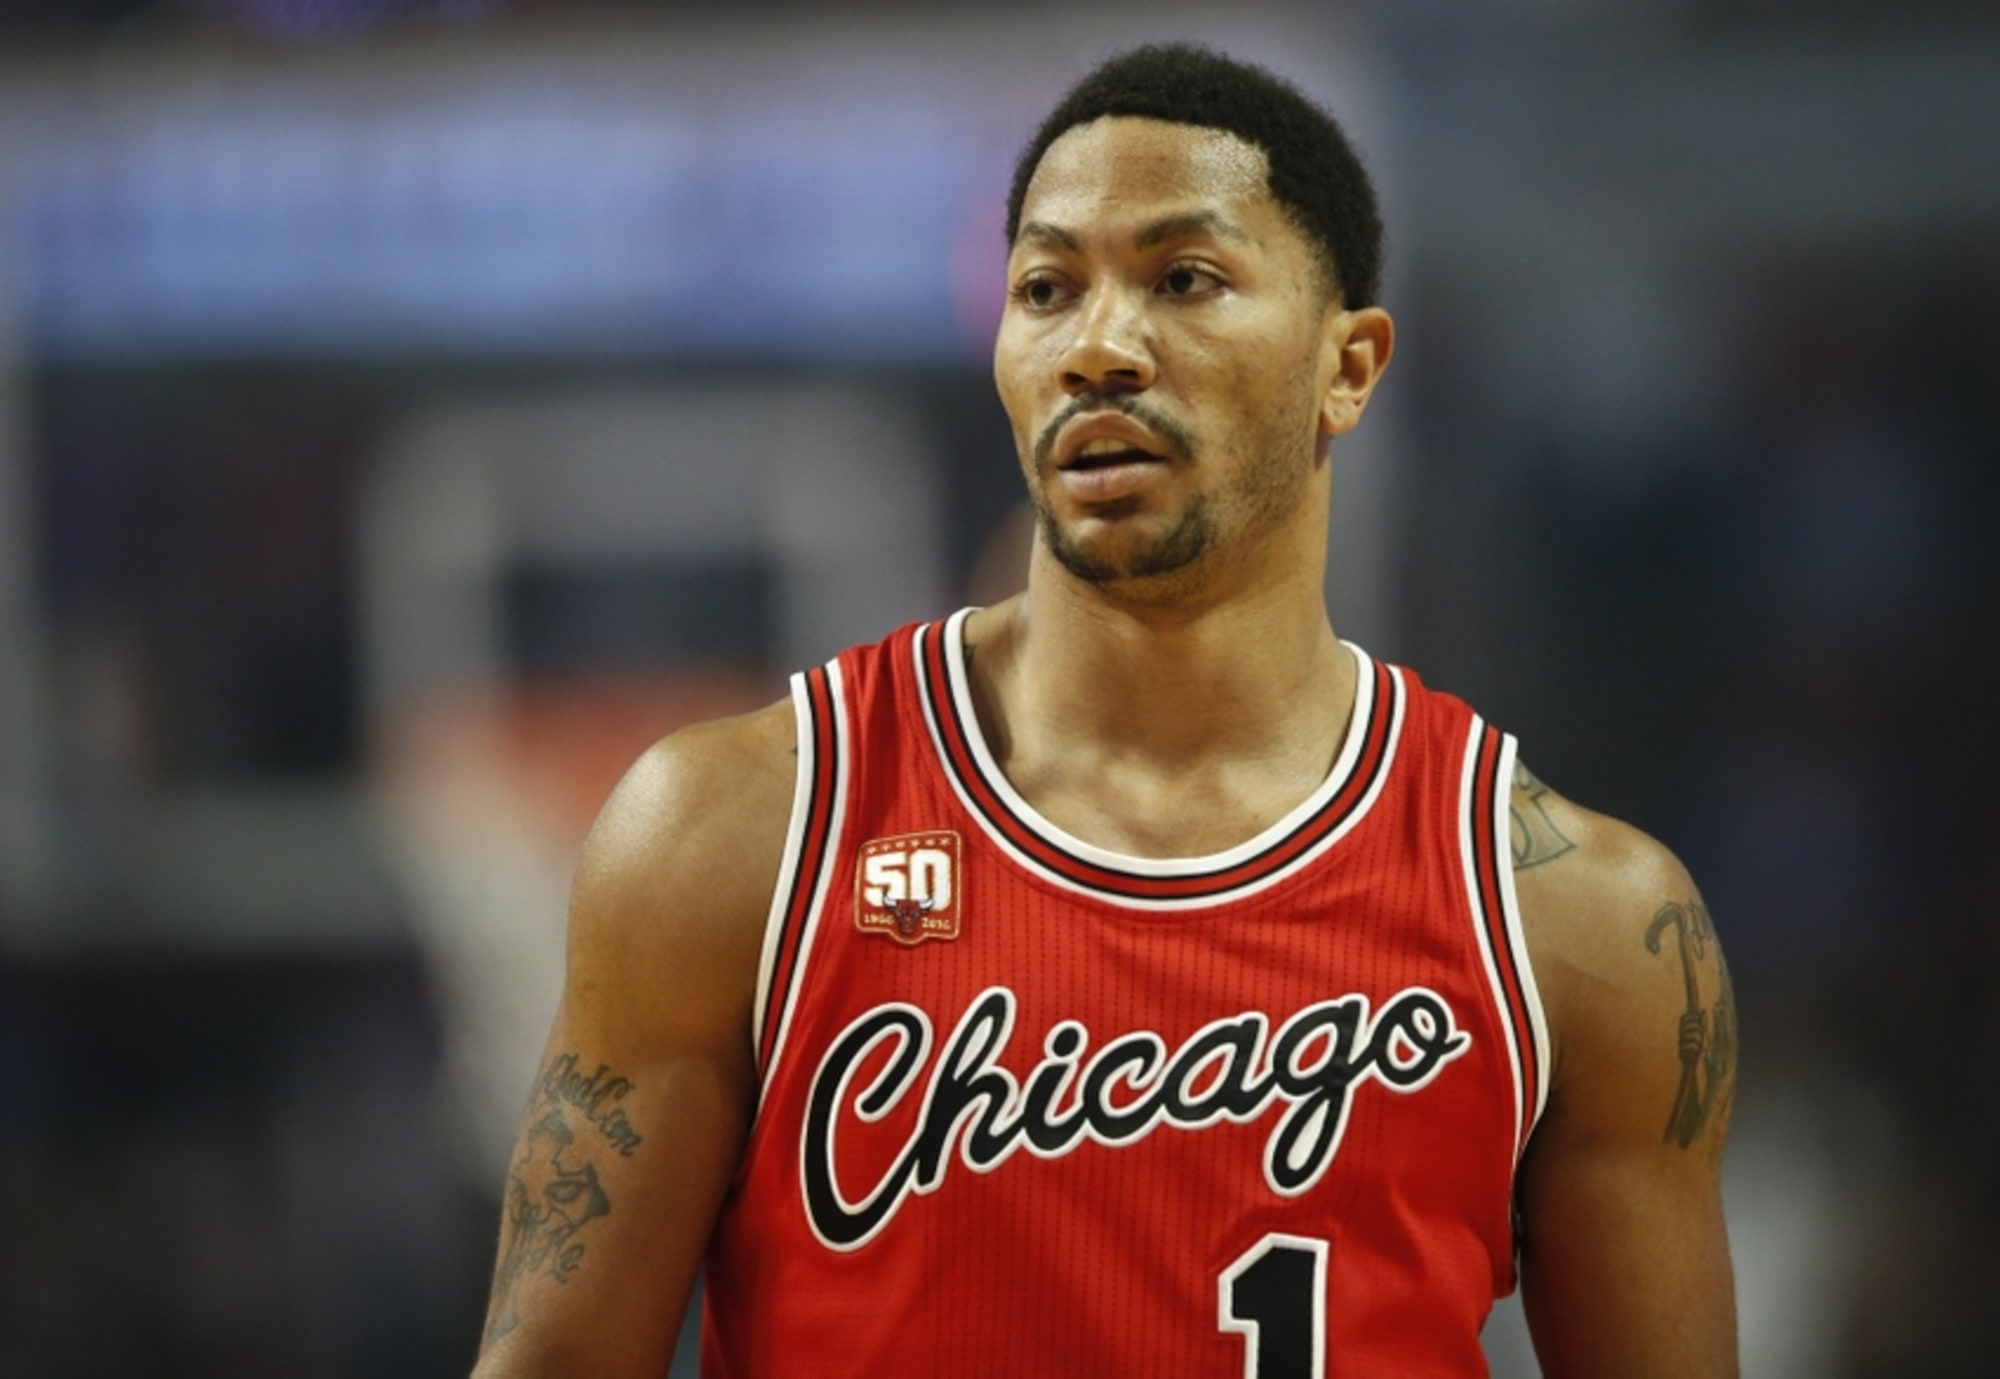 Derrick Rose on the Bulls and growing up in Chicago